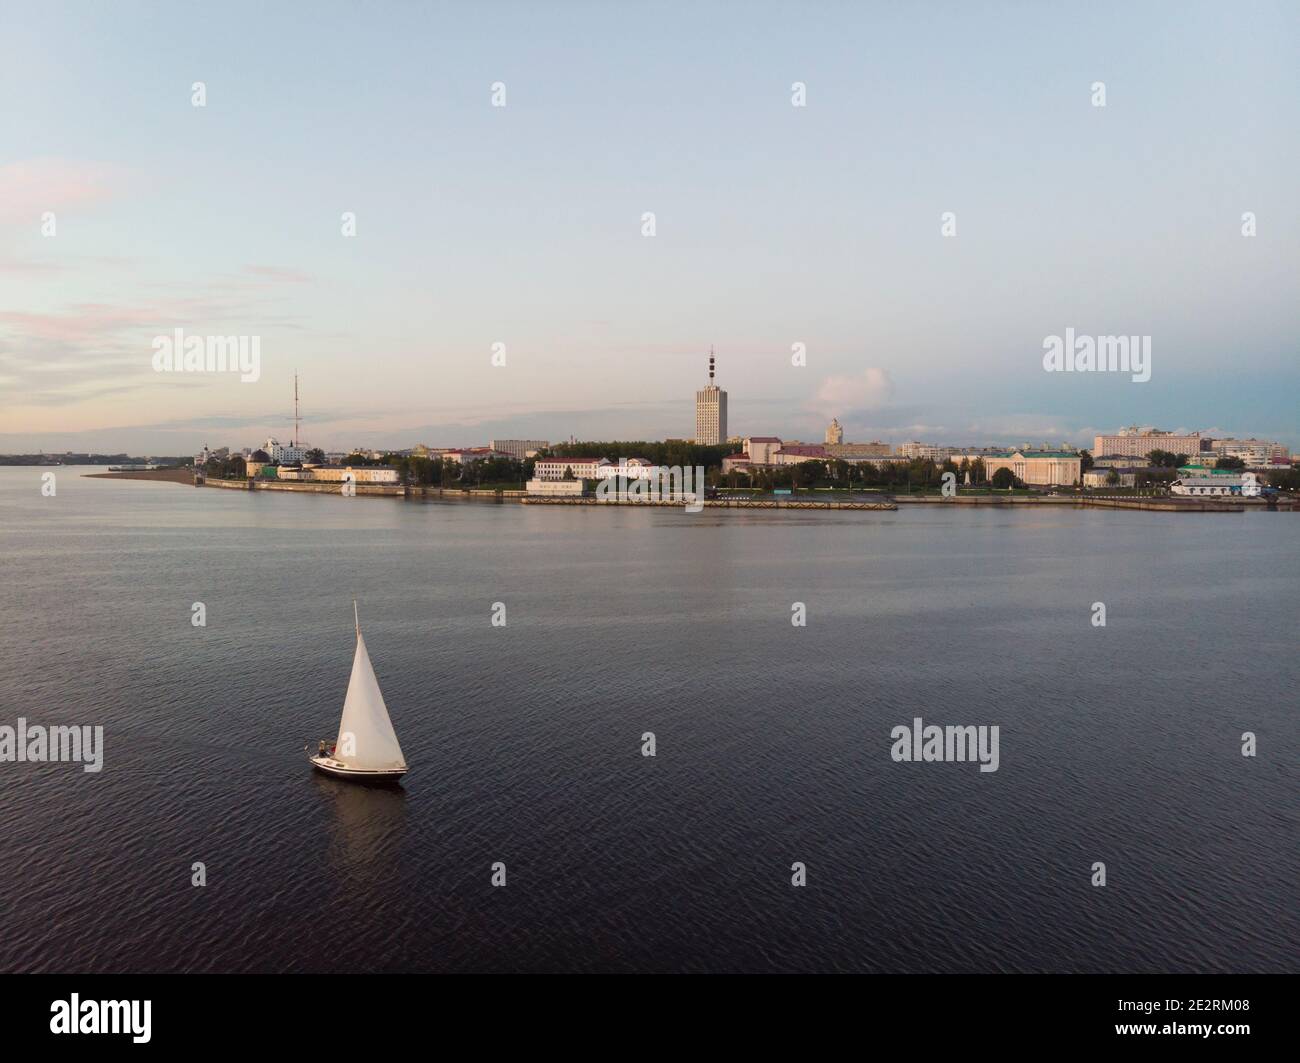 September, 2020 - Arkhangelsk. White yacht with a white sail on the background of the city of Arkhangelsk. Northern Dvina River. Arkhangelsk port. Rus Stock Photo